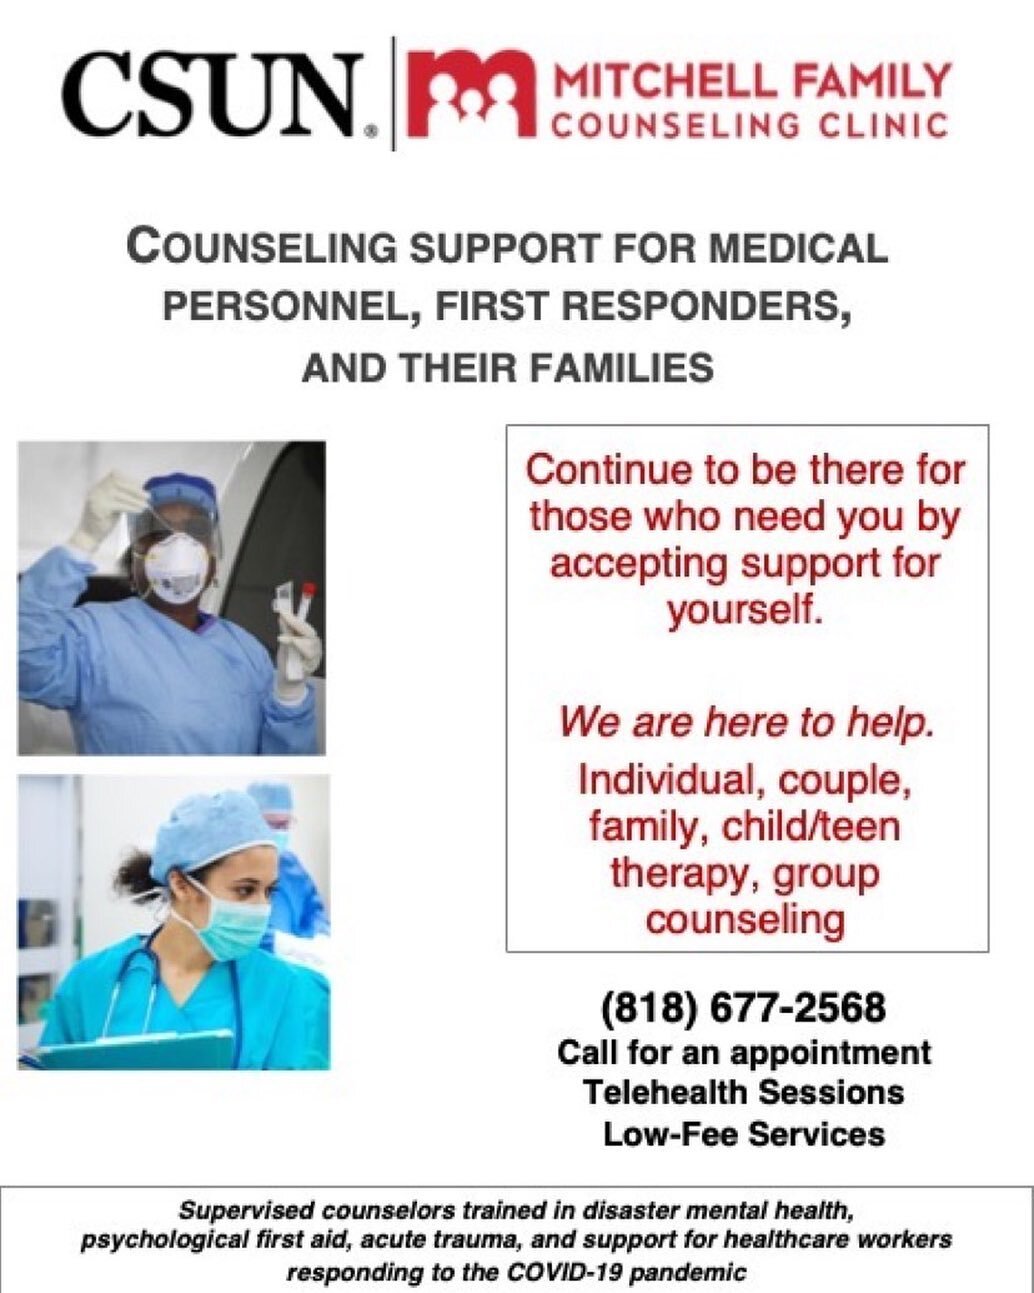 Repost from @deb_b52
&bull;
Proud to announce our new program in support of those on the frontlines of the COVID-19 crisis #csun #mitchellfamilycounseling